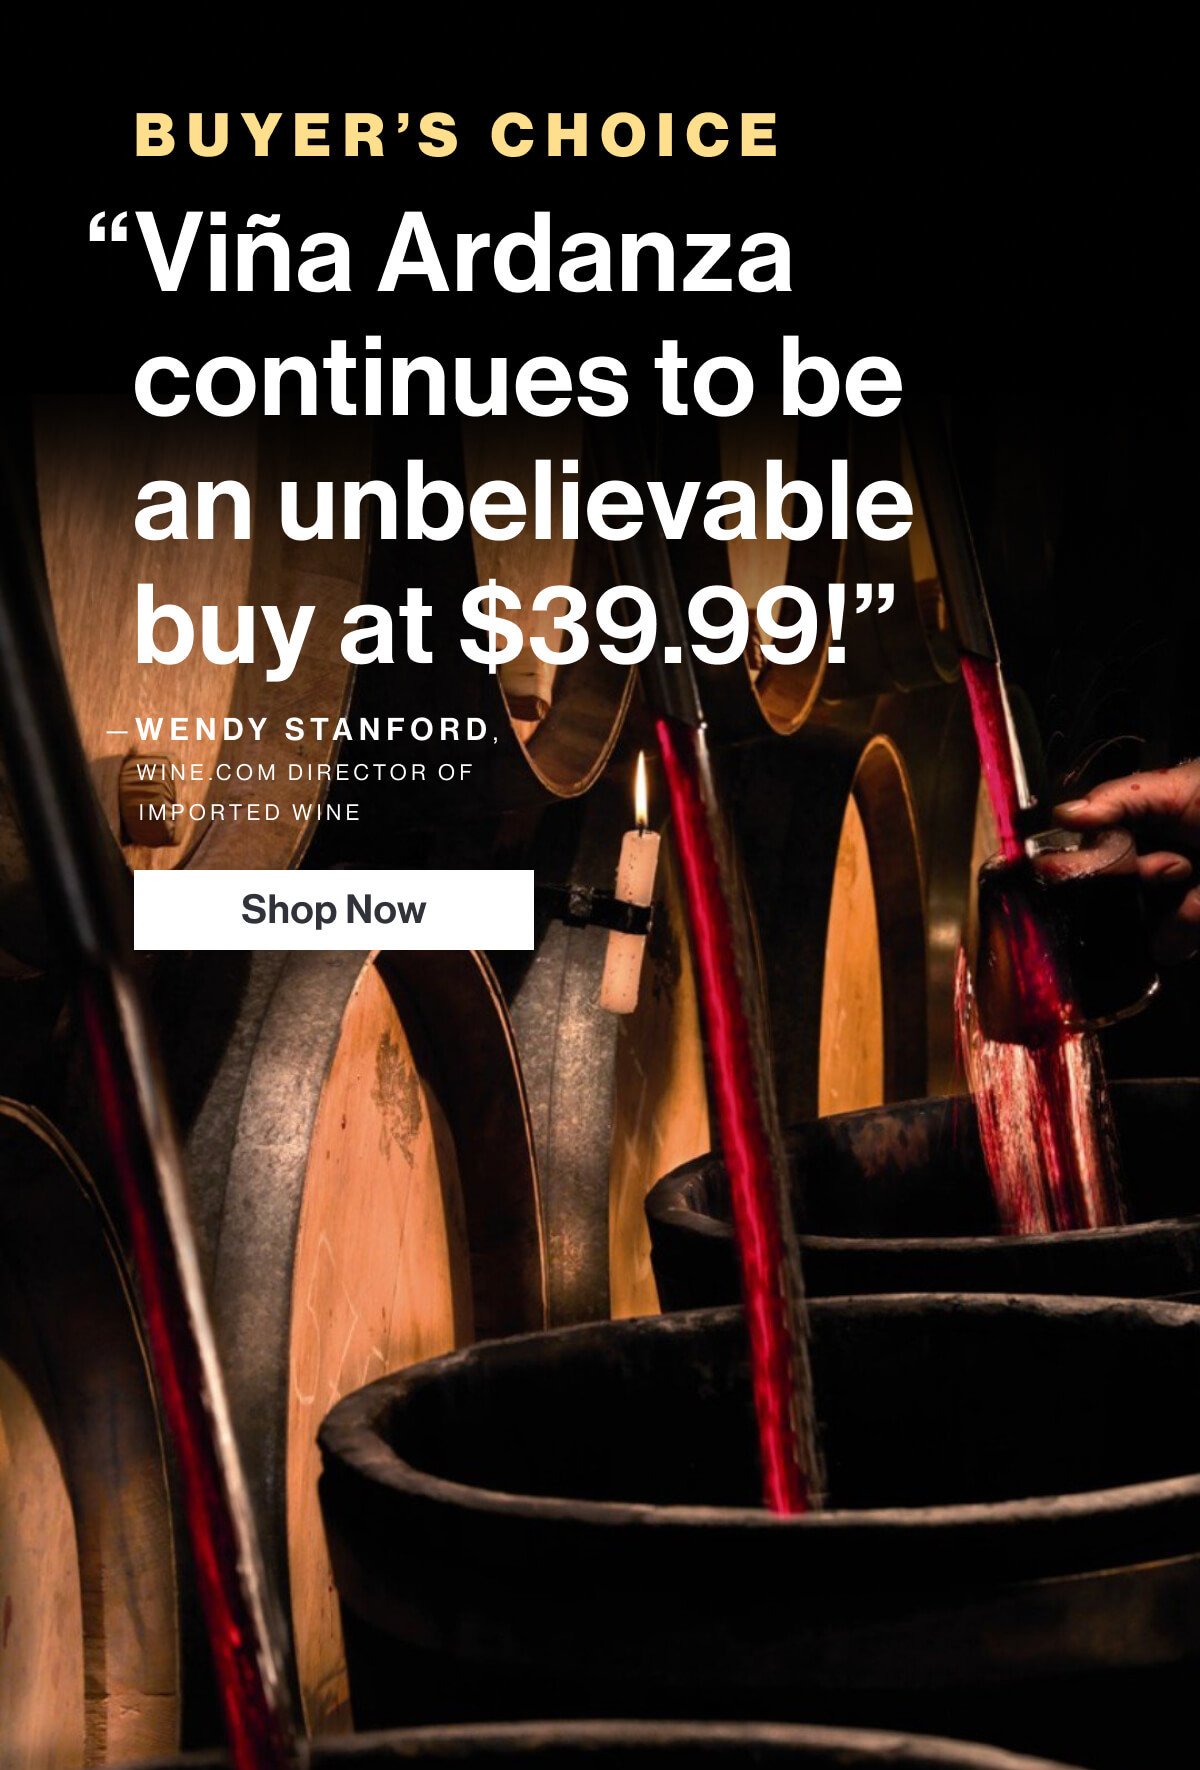 Buyer's Choice - Vina Ardanza continues to be an unbelievable buy at $39.99. Shop Now.